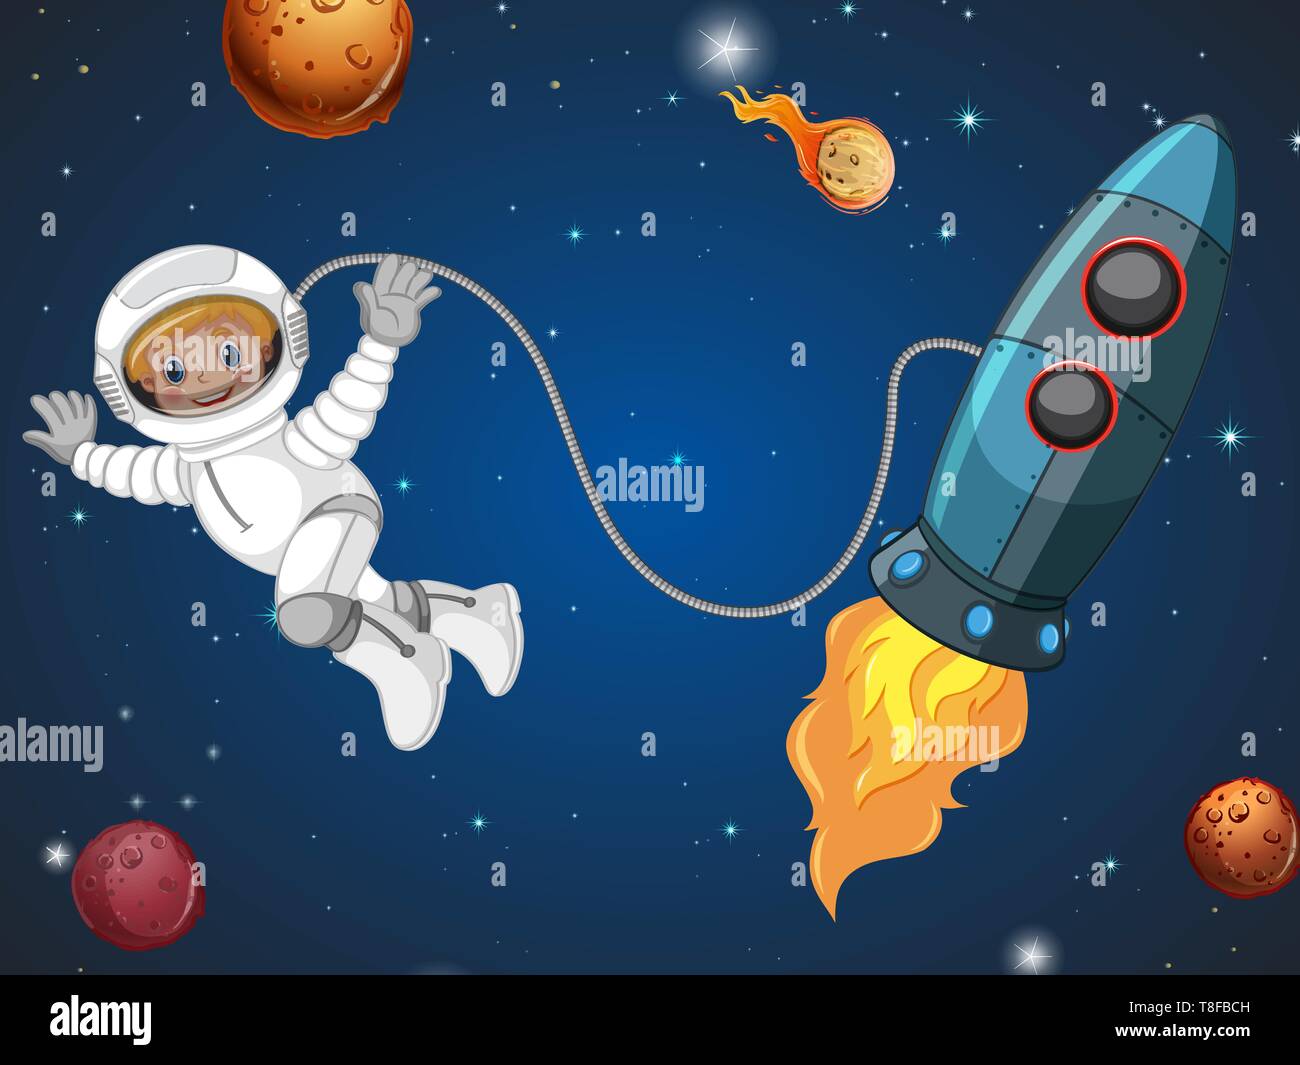 An astronaut in the space illustration Stock Vector